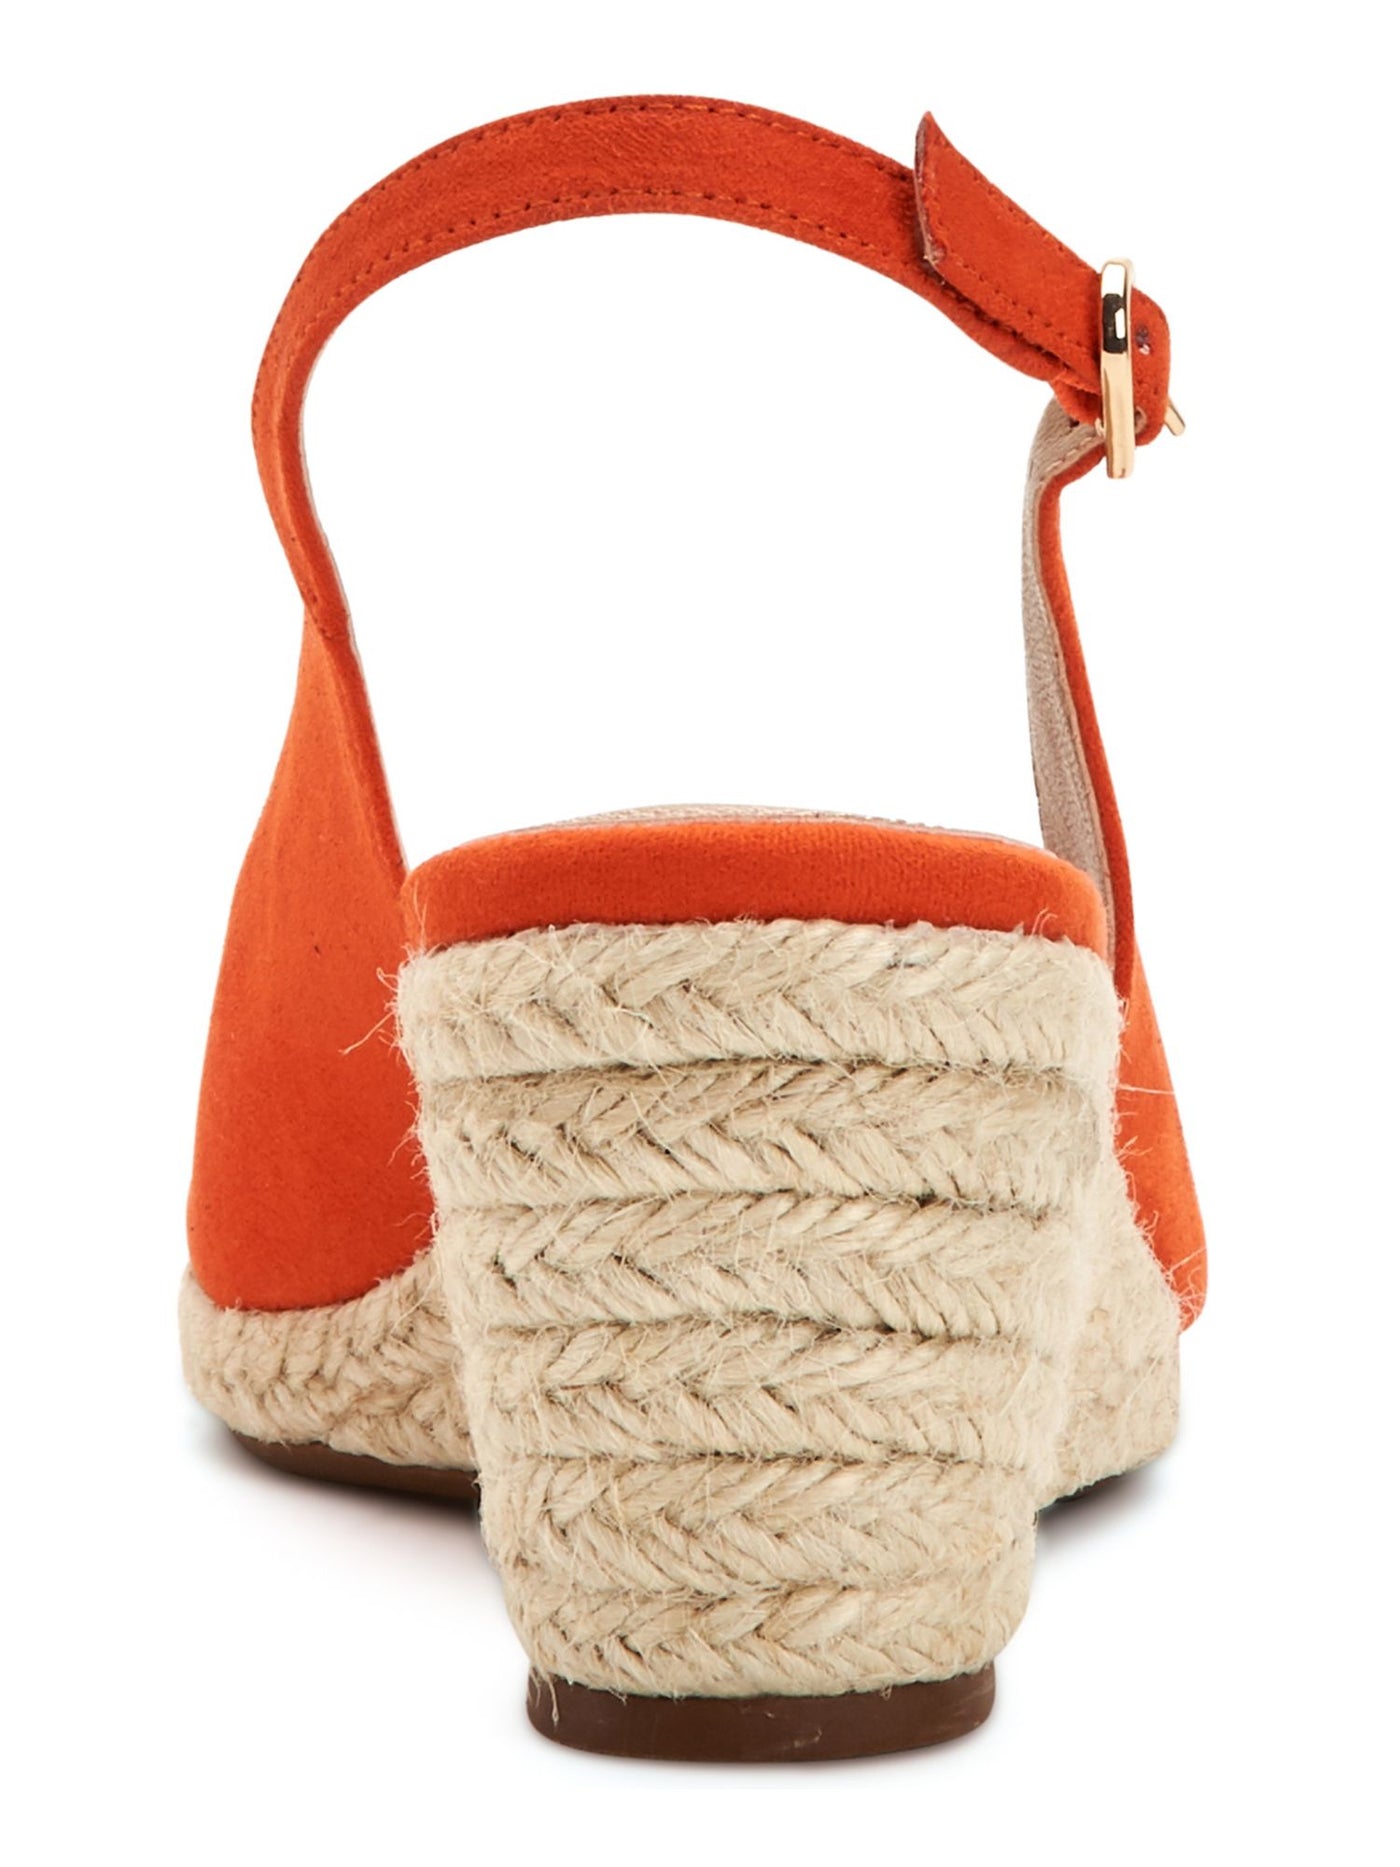 CHARTER CLUB Womens Orange Padded Ankle Strap Tamaare Round Toe Wedge Buckle Espadrille Shoes 5 M